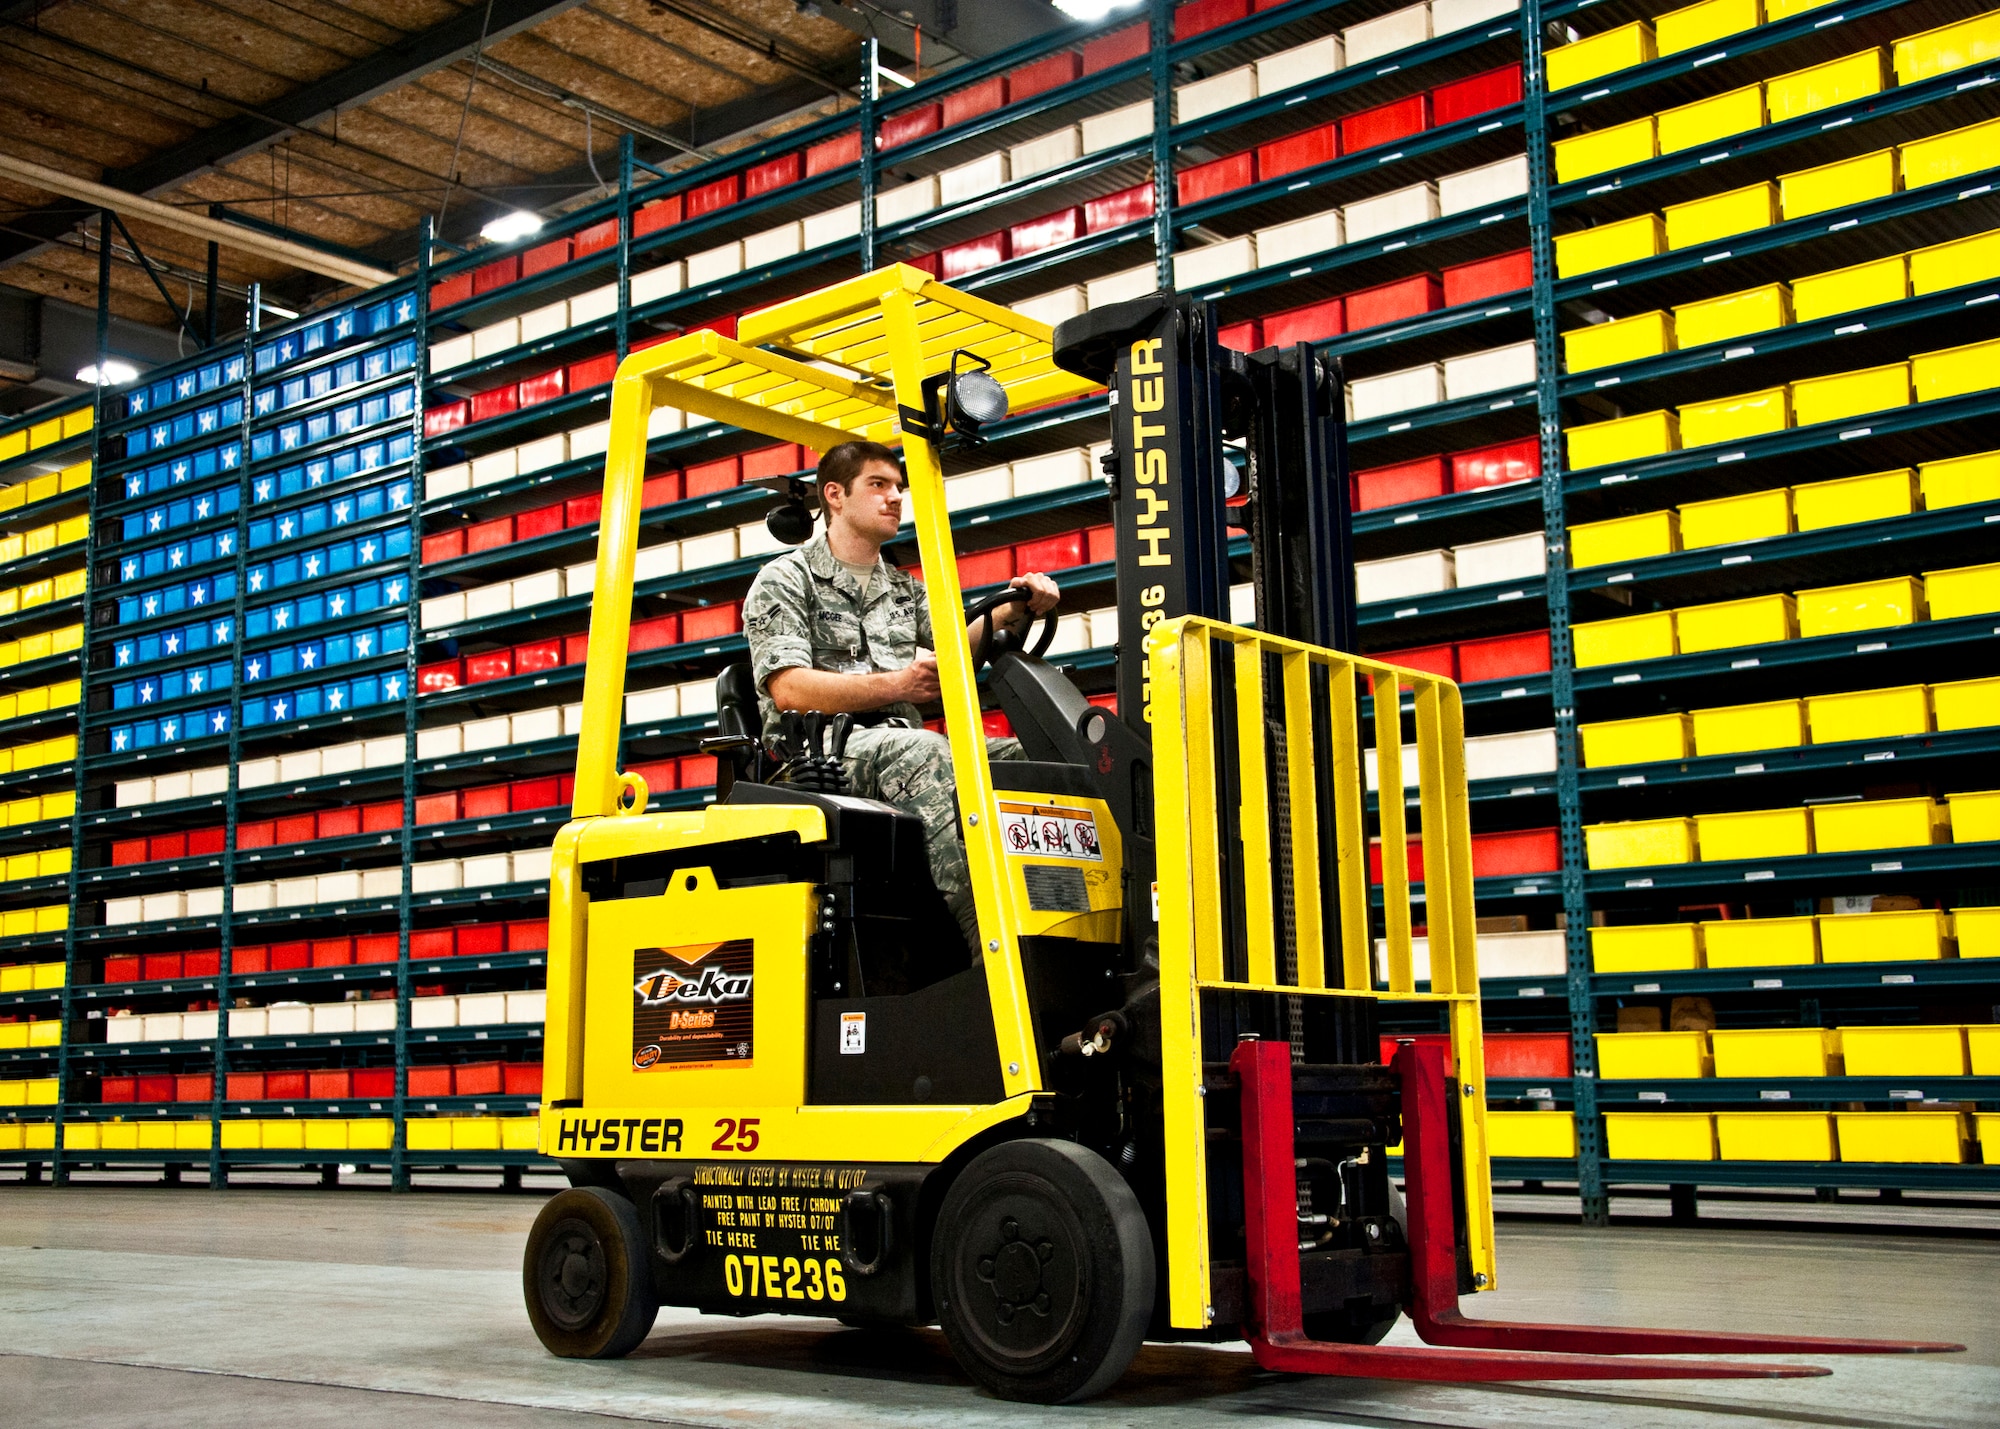 Airman 1st Class Jonathan McGee, 96th Materiel Management Flight, drives a forklift through Eglin's supply warehouse.  Eglin's materiel management flight is the largest supply flight in the U.S.  Approximately 125 military and civilian personnel manage more than 50,000 items valued at $875 million.  They also manage more than 300 nonexpendable equipment accounts tracking more than $700 million in assets spread across Eglin and other locations. The materiel management flight is part of the 96th Logistics Readiness Squadron.  (U.S. Air Force photo/Samuel King Jr.)